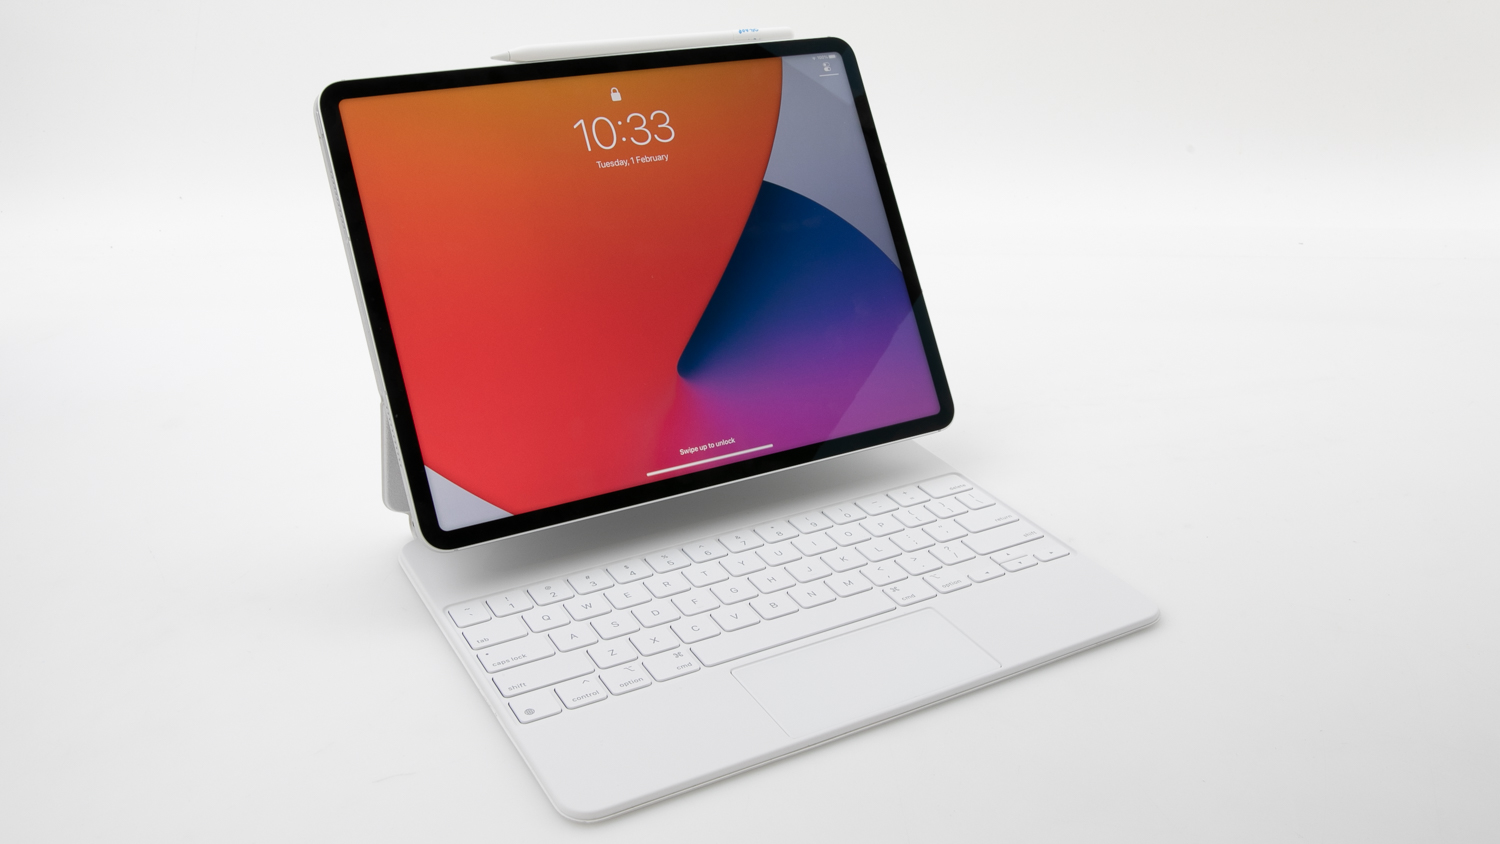 Apple iPad Pro 12.9-inch (5th Generation) Wi-Fi + Cellular (A2461) with Magic Keyboard and Pencil (2nd gen) carousel image